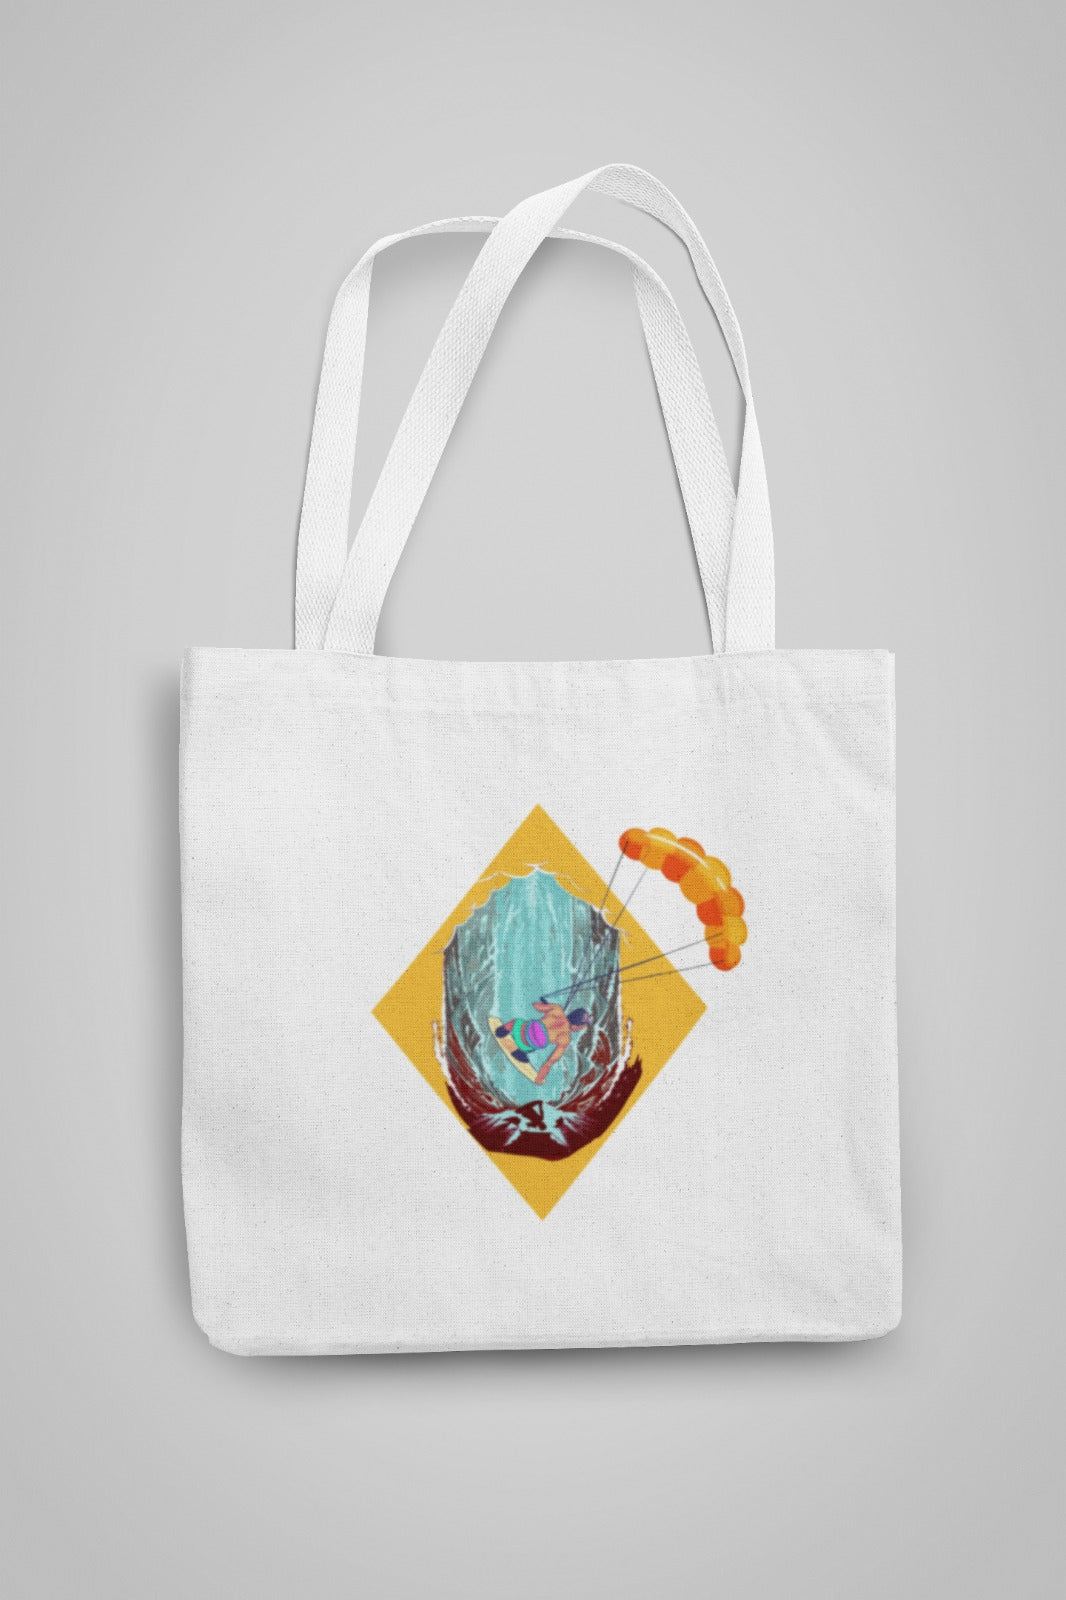 Surfing waterfalls Tote Bag With Zipper by @Bisky_t